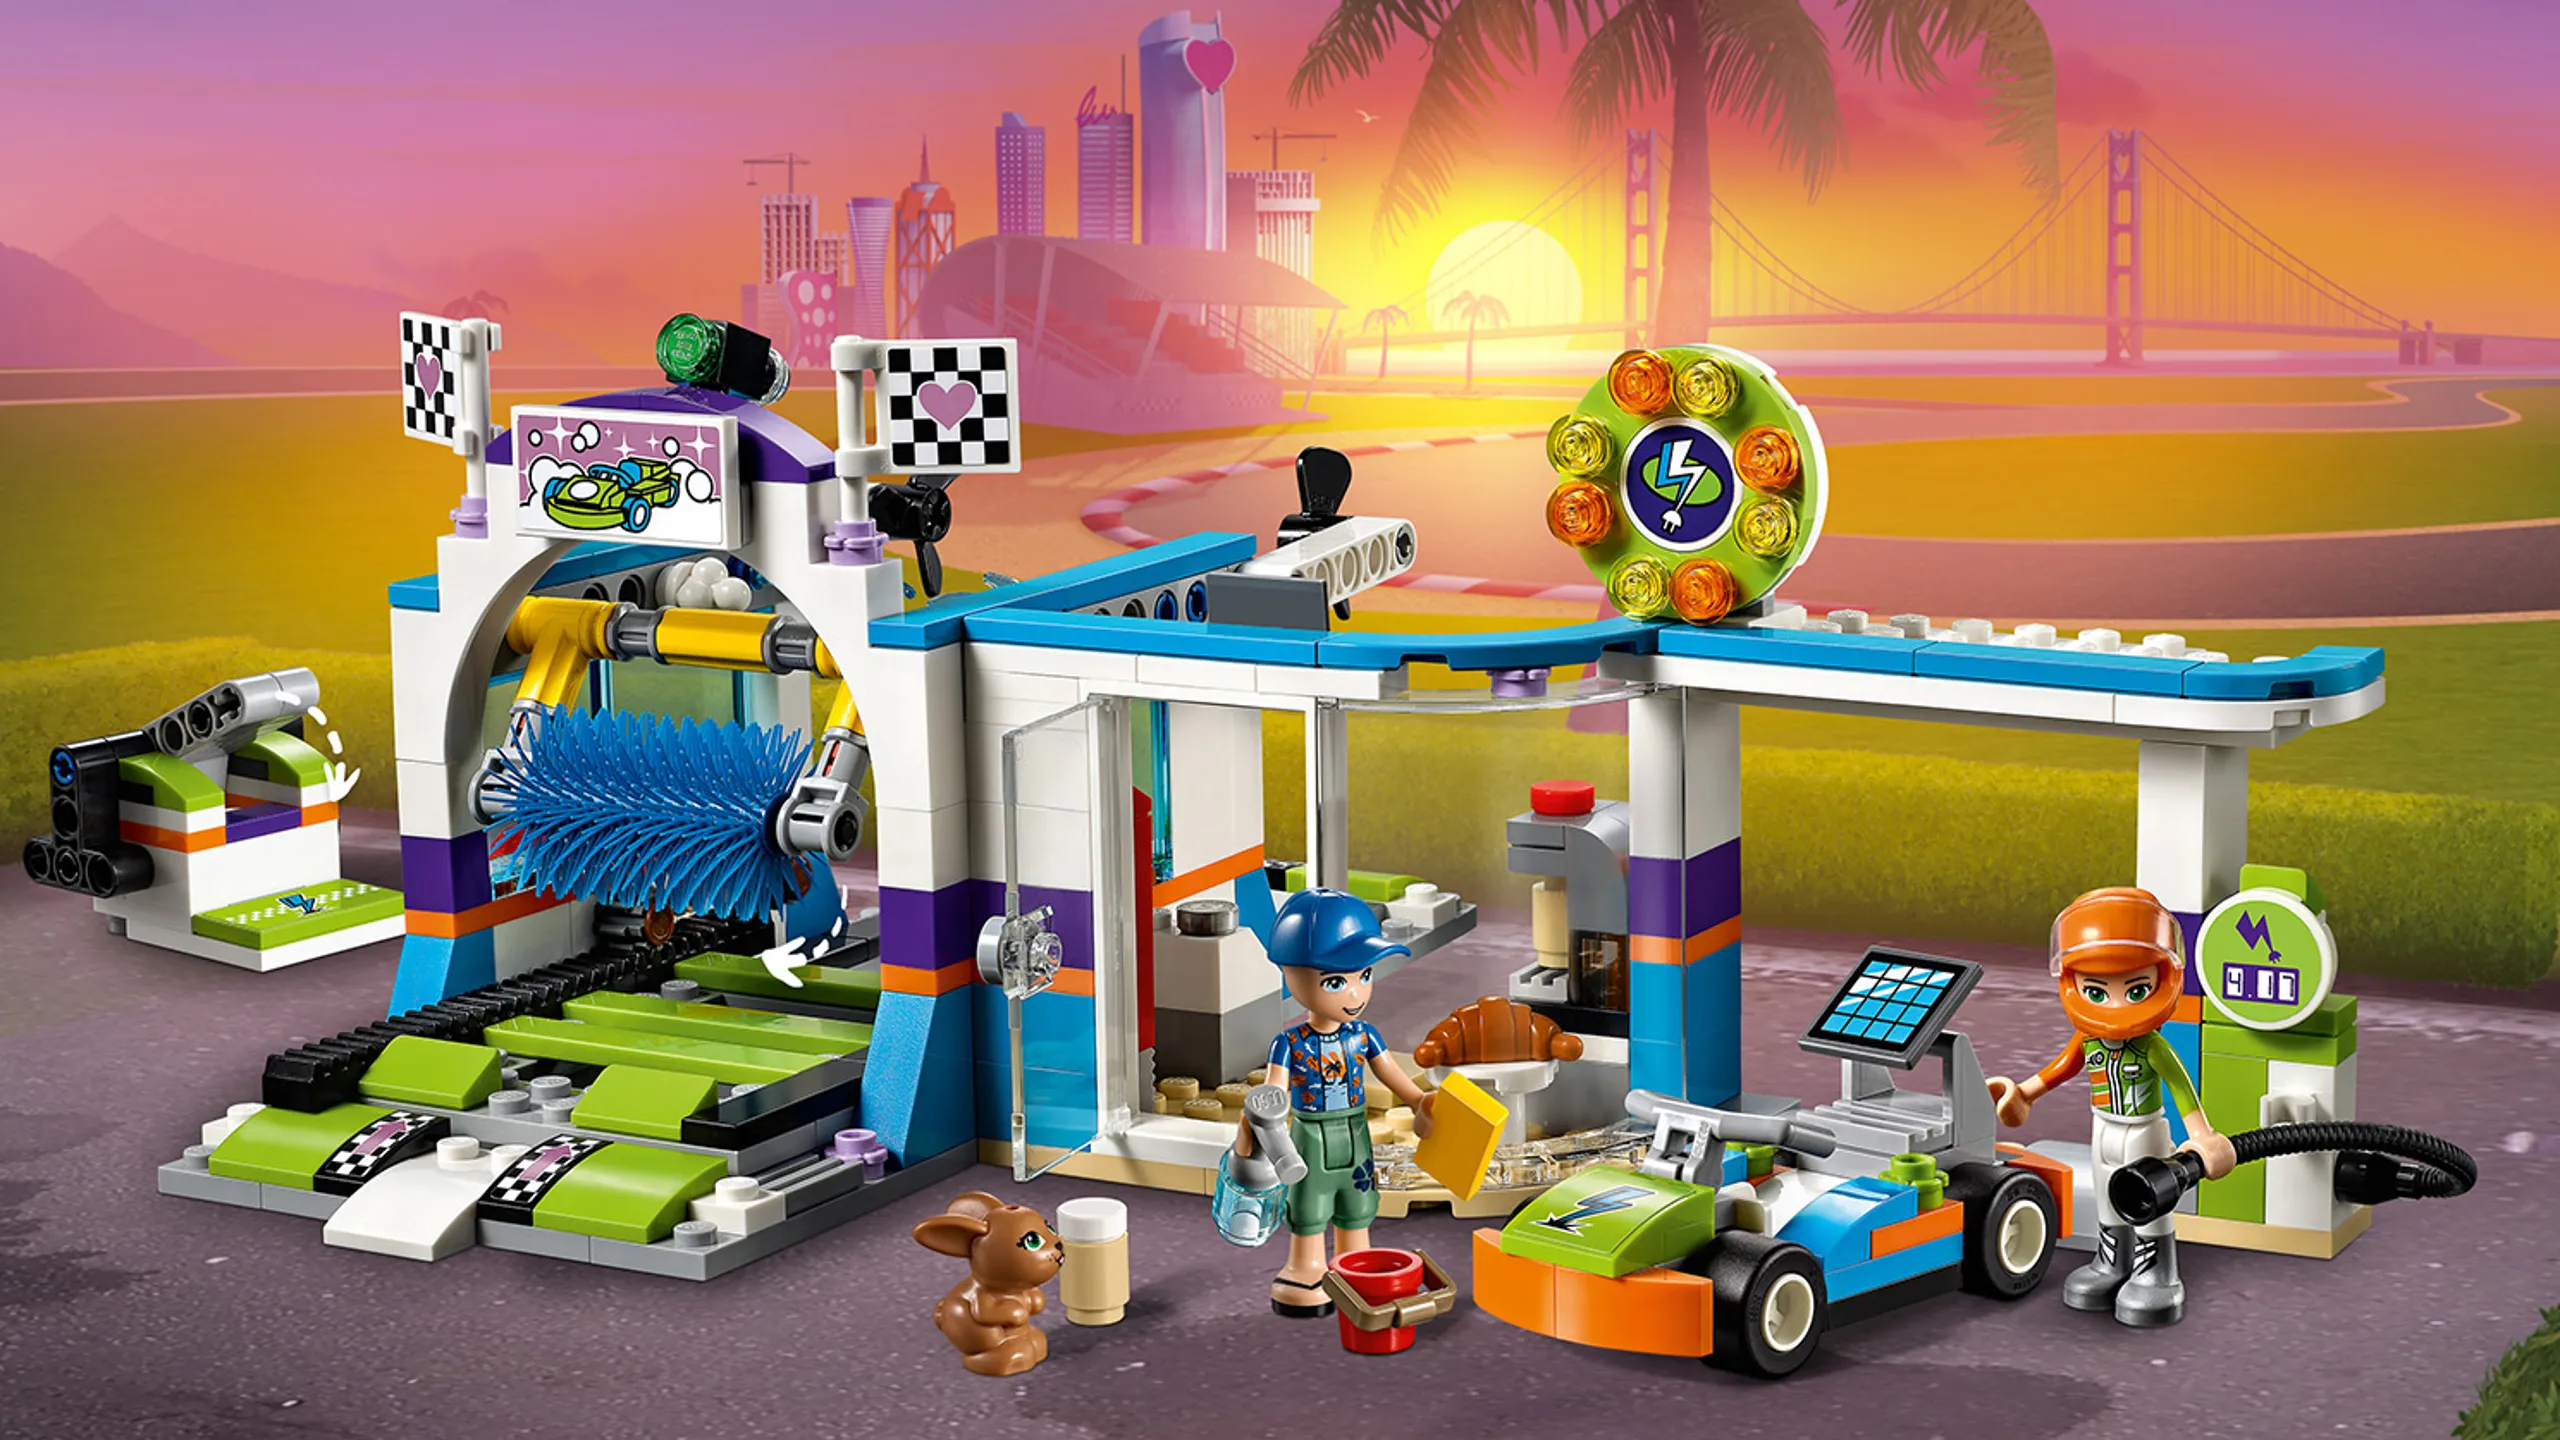 LEGO Friends - 41350 Spinning Brushes Car Wash - Mia drives her acing car to the Car Wash whee Zack is ready to service and wash the car with special brushes and refuel it while Mia can eat a croissant in the break room.